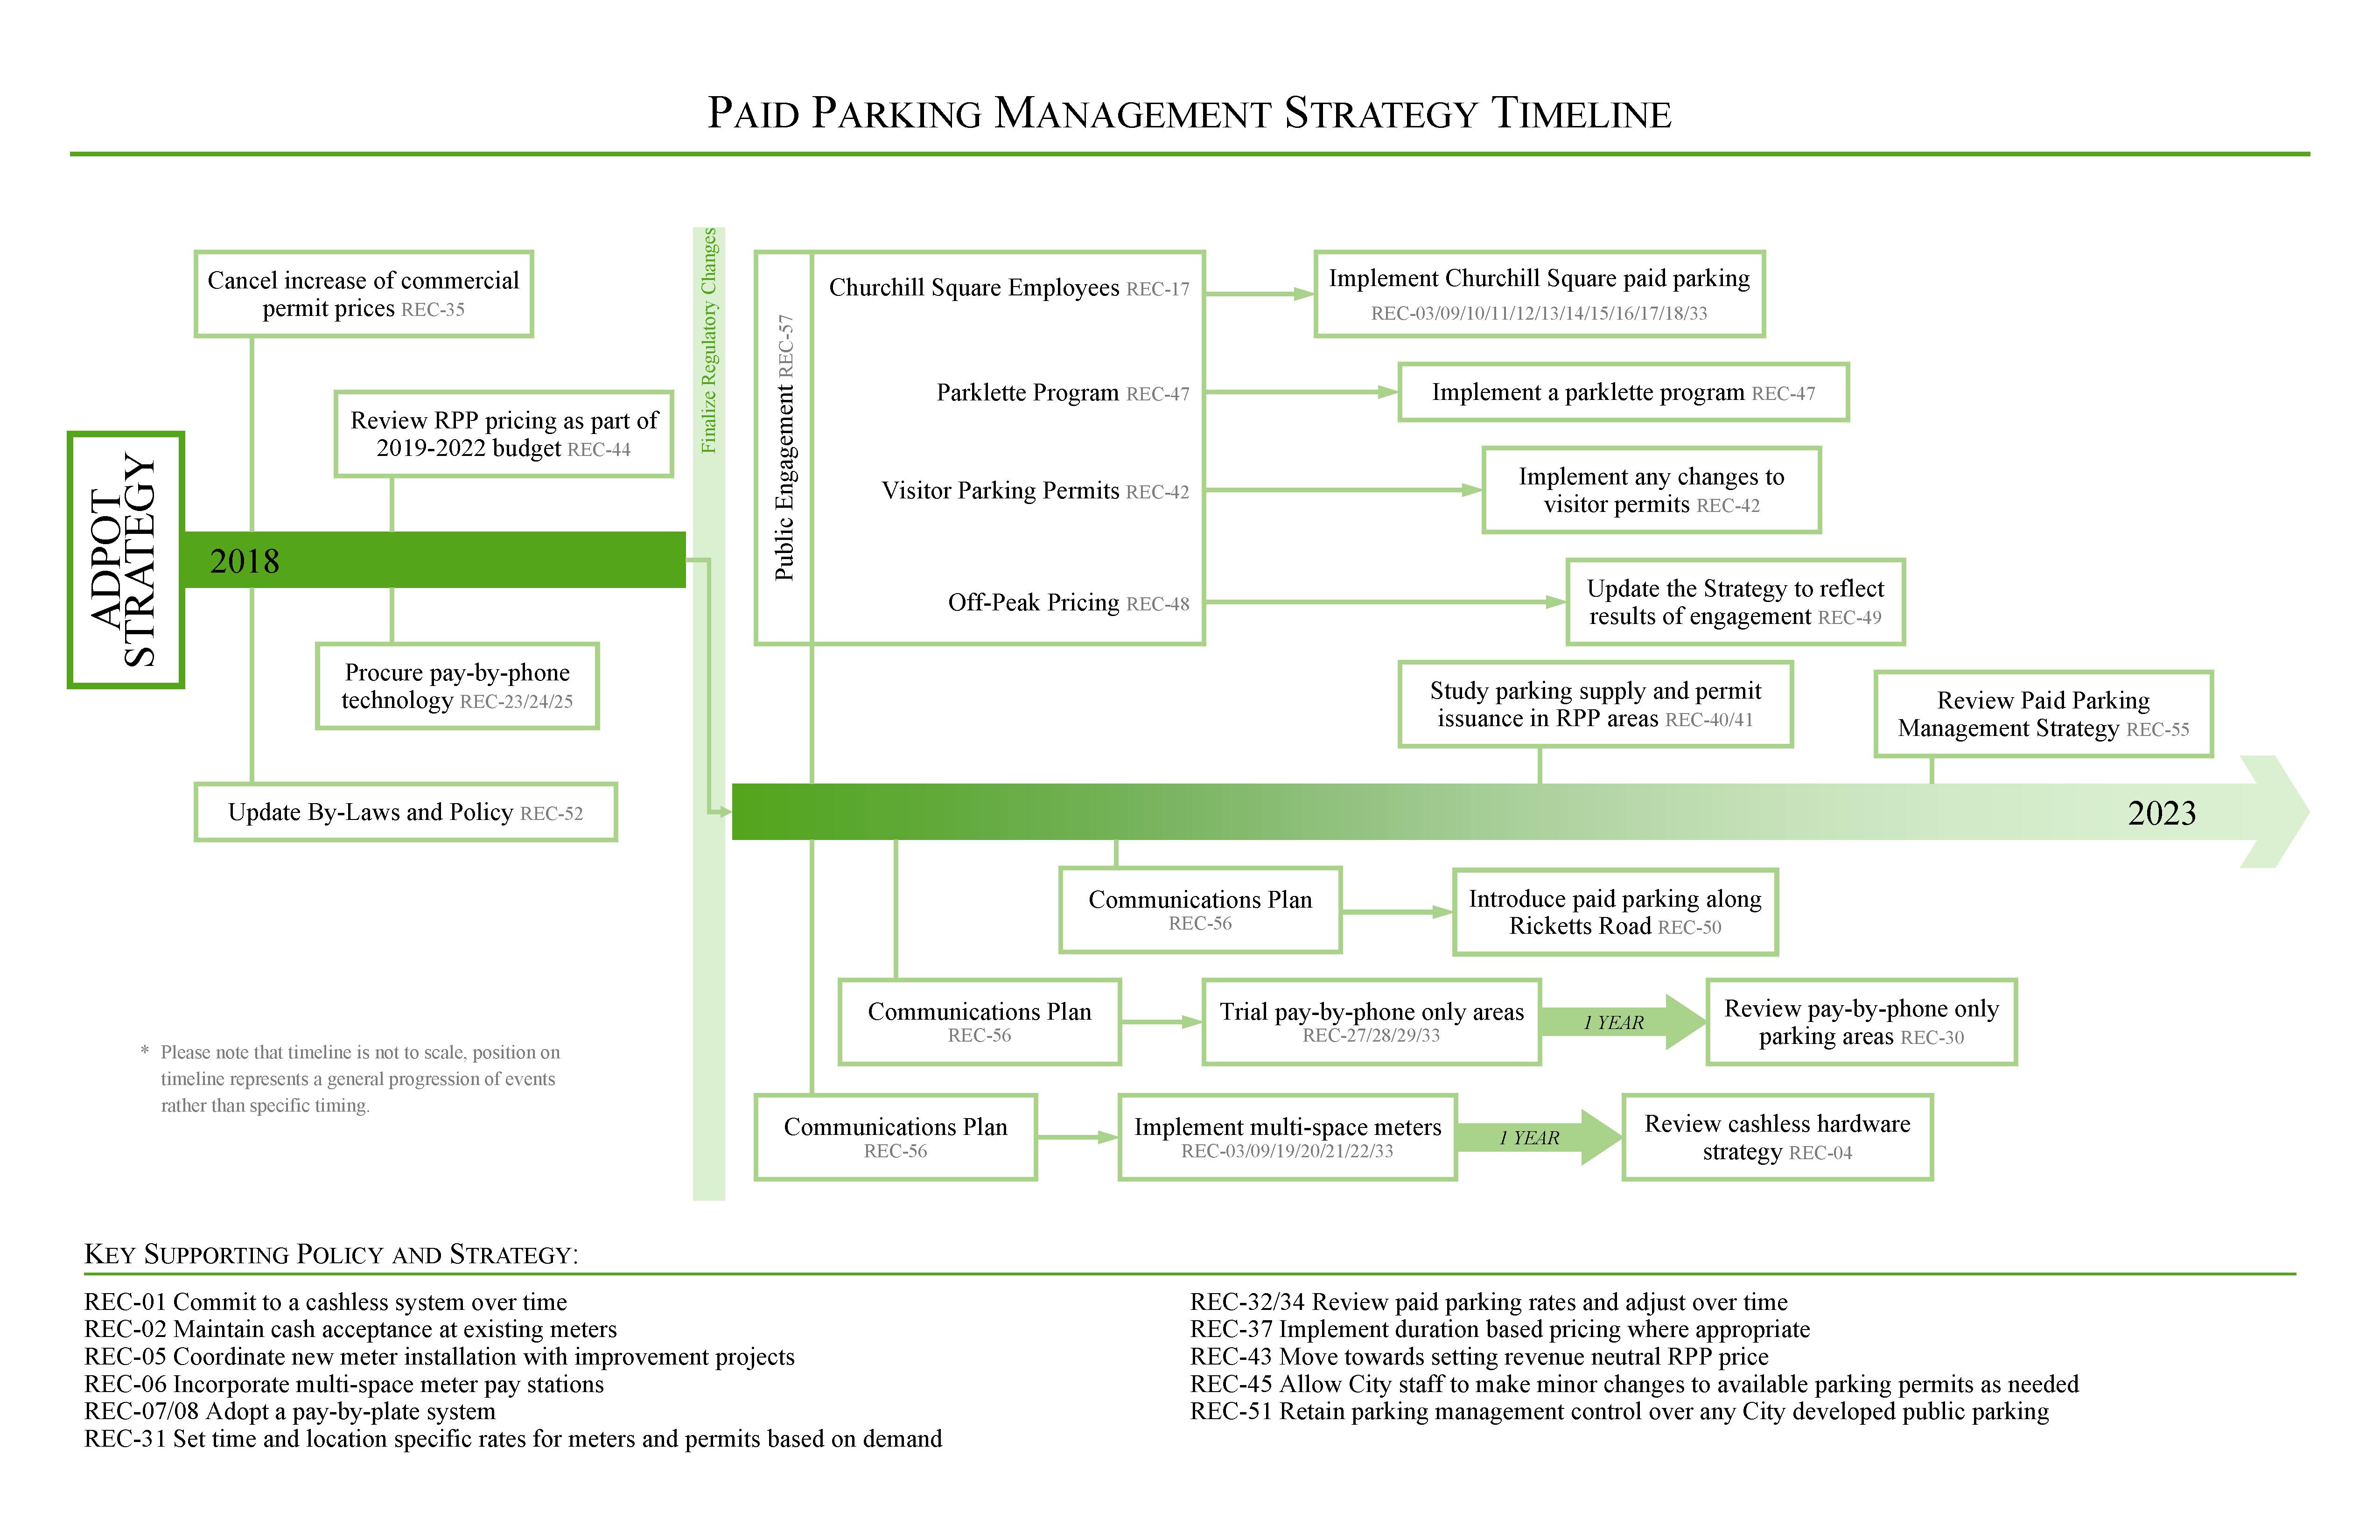 Paid Parking Manage Timeline